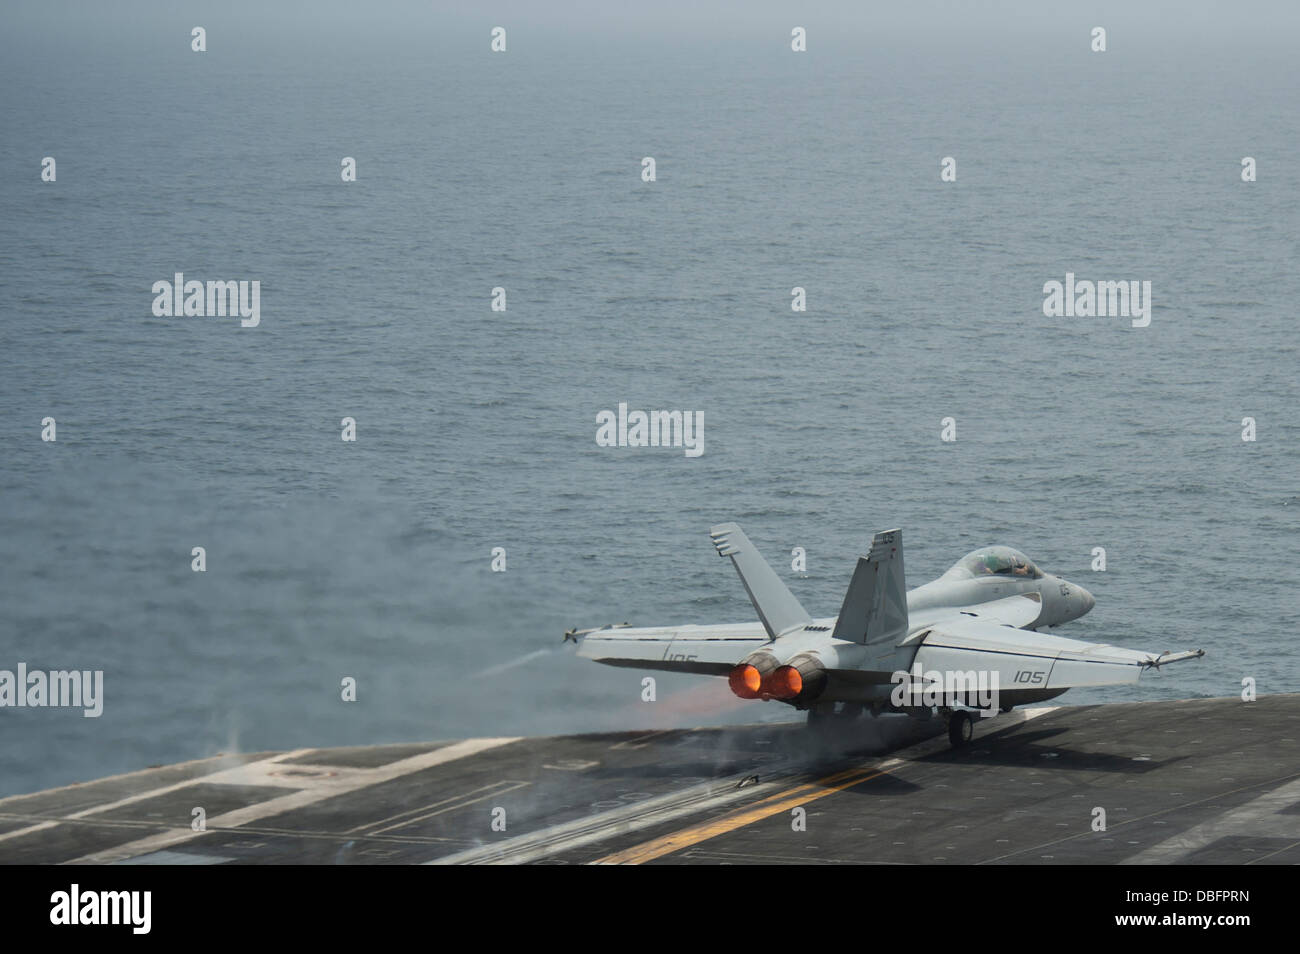 F/A-18F Super Hornet assigned to the Black Knights of Strike Fighter Squadron (VFA) 154 launches from the flight deck of the ai Stock Photo